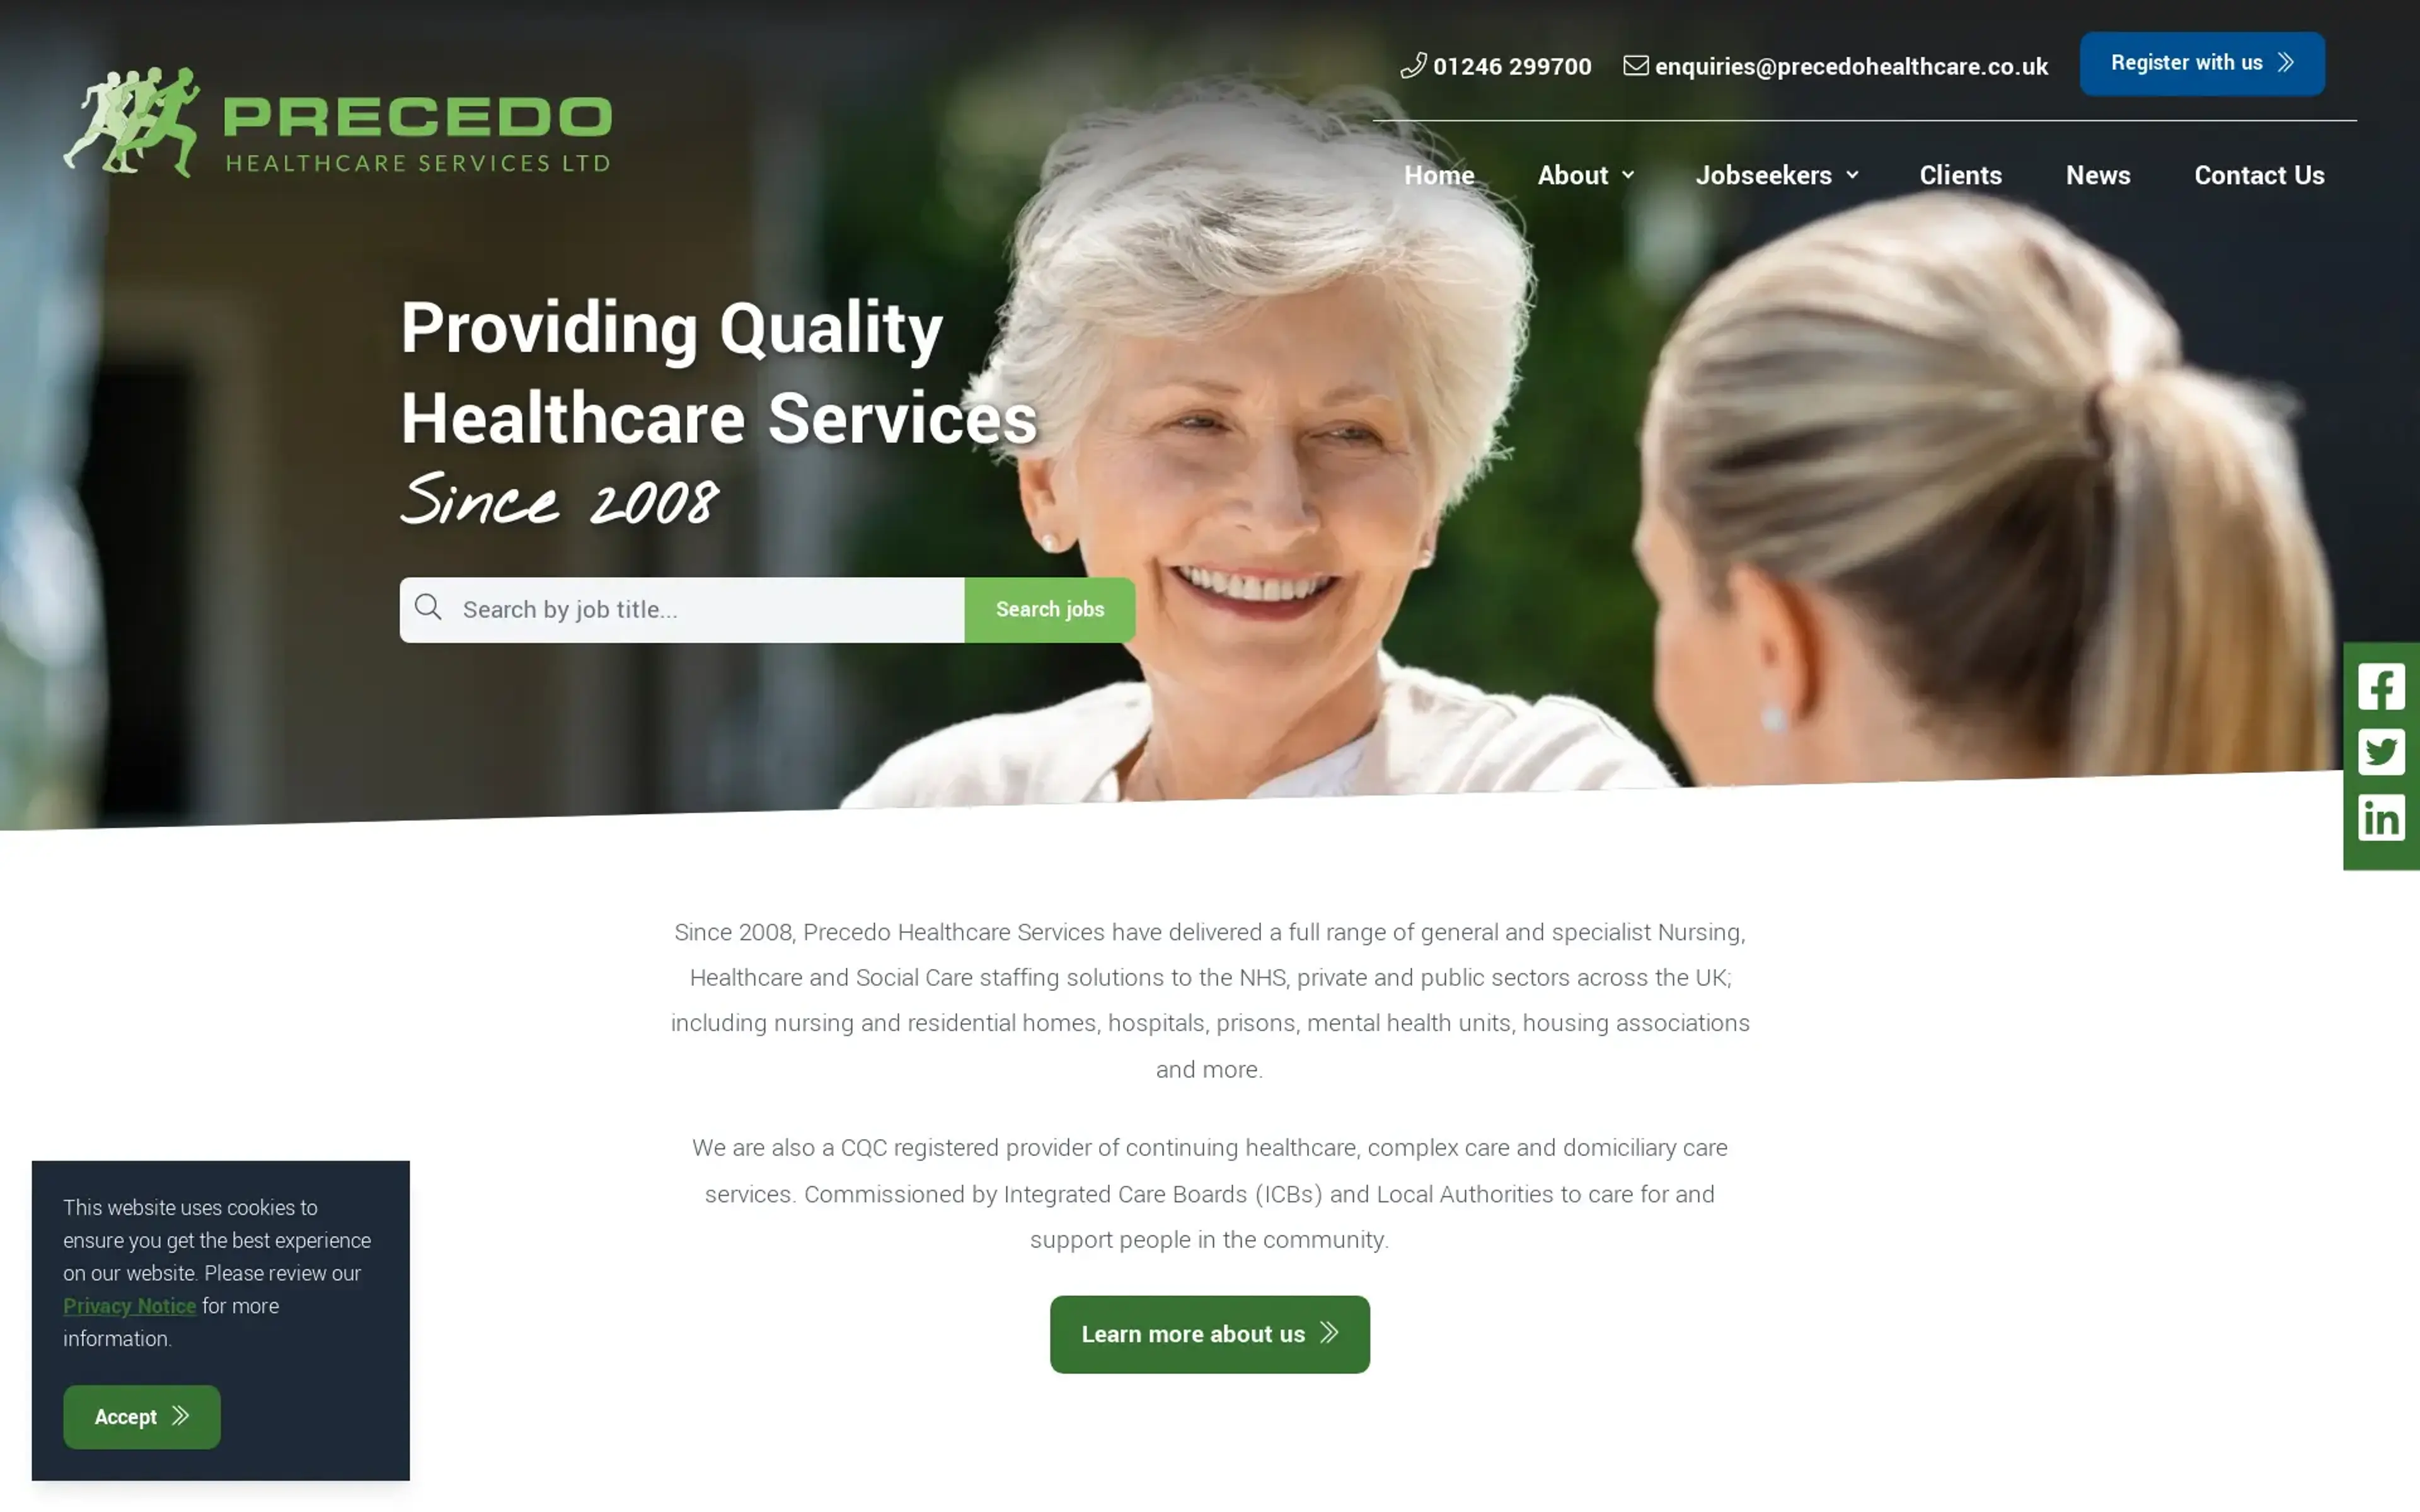 Recent project we worked on for Precedo Healthcare